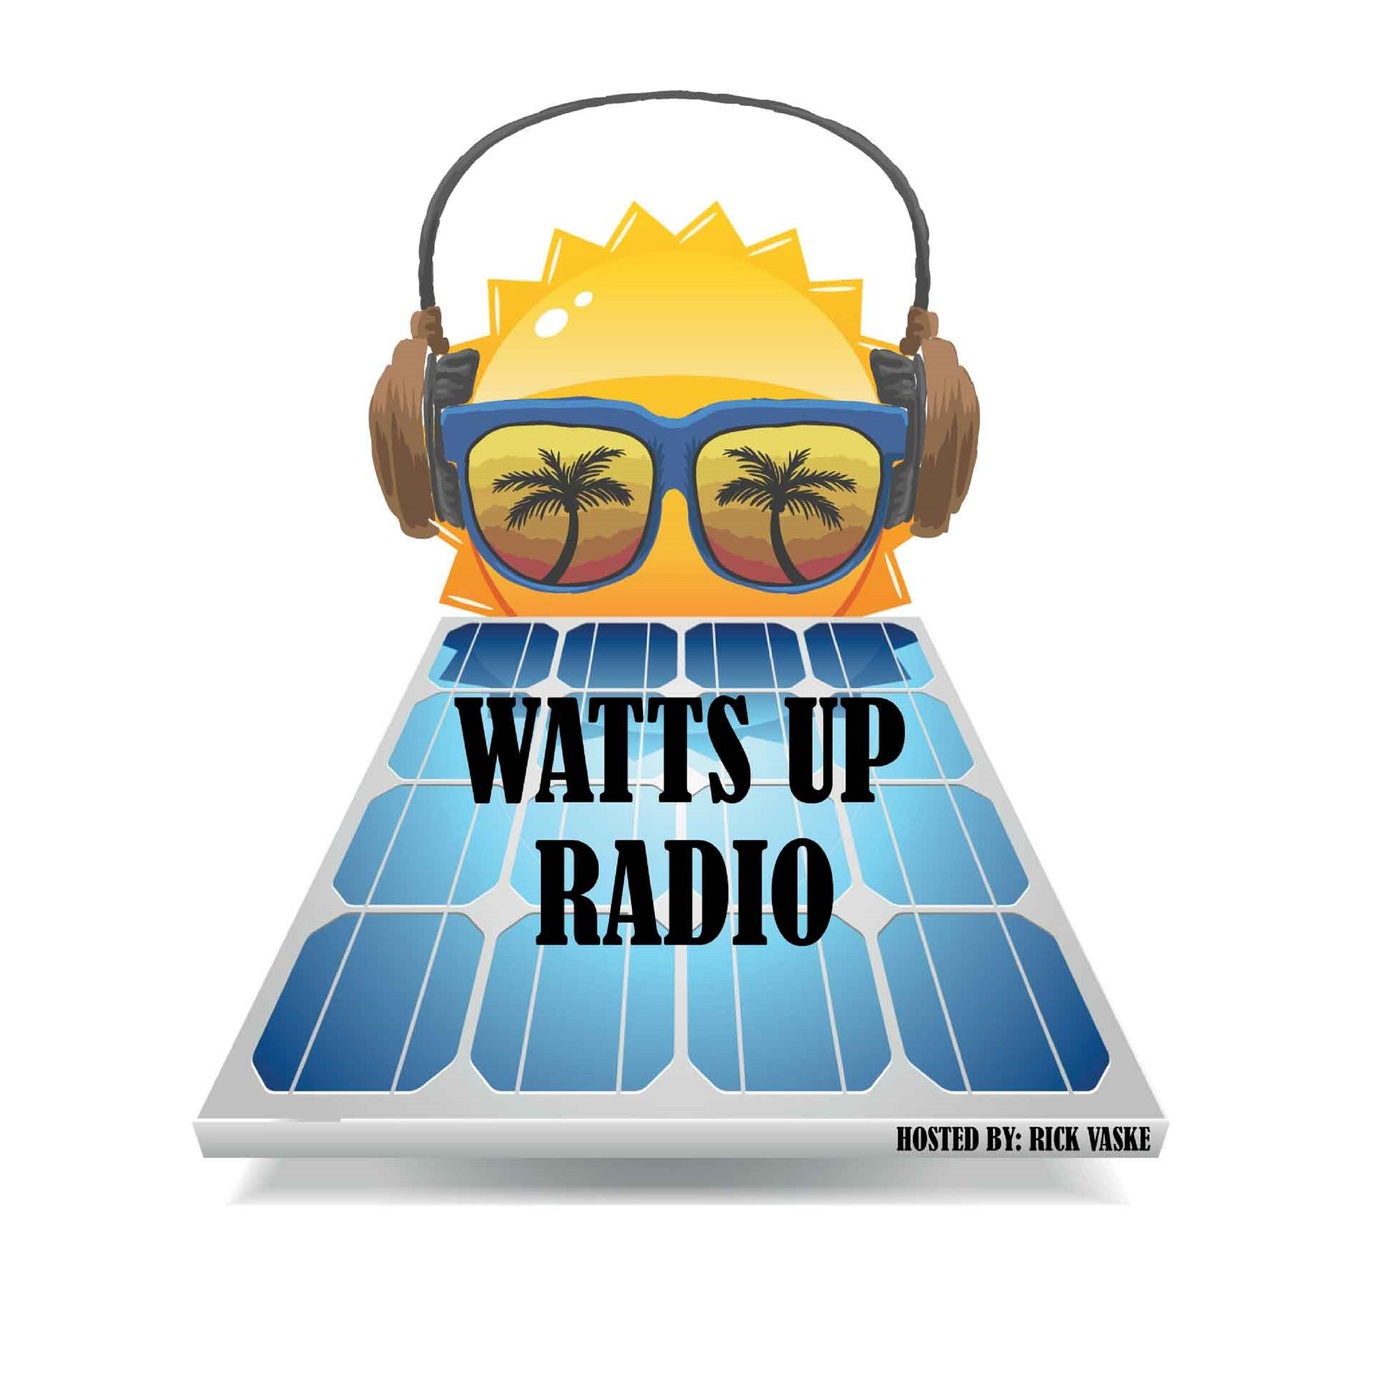 Watts Up Radio - Major Brand Names Getting Into Solar... Is that a Good Thing Though?